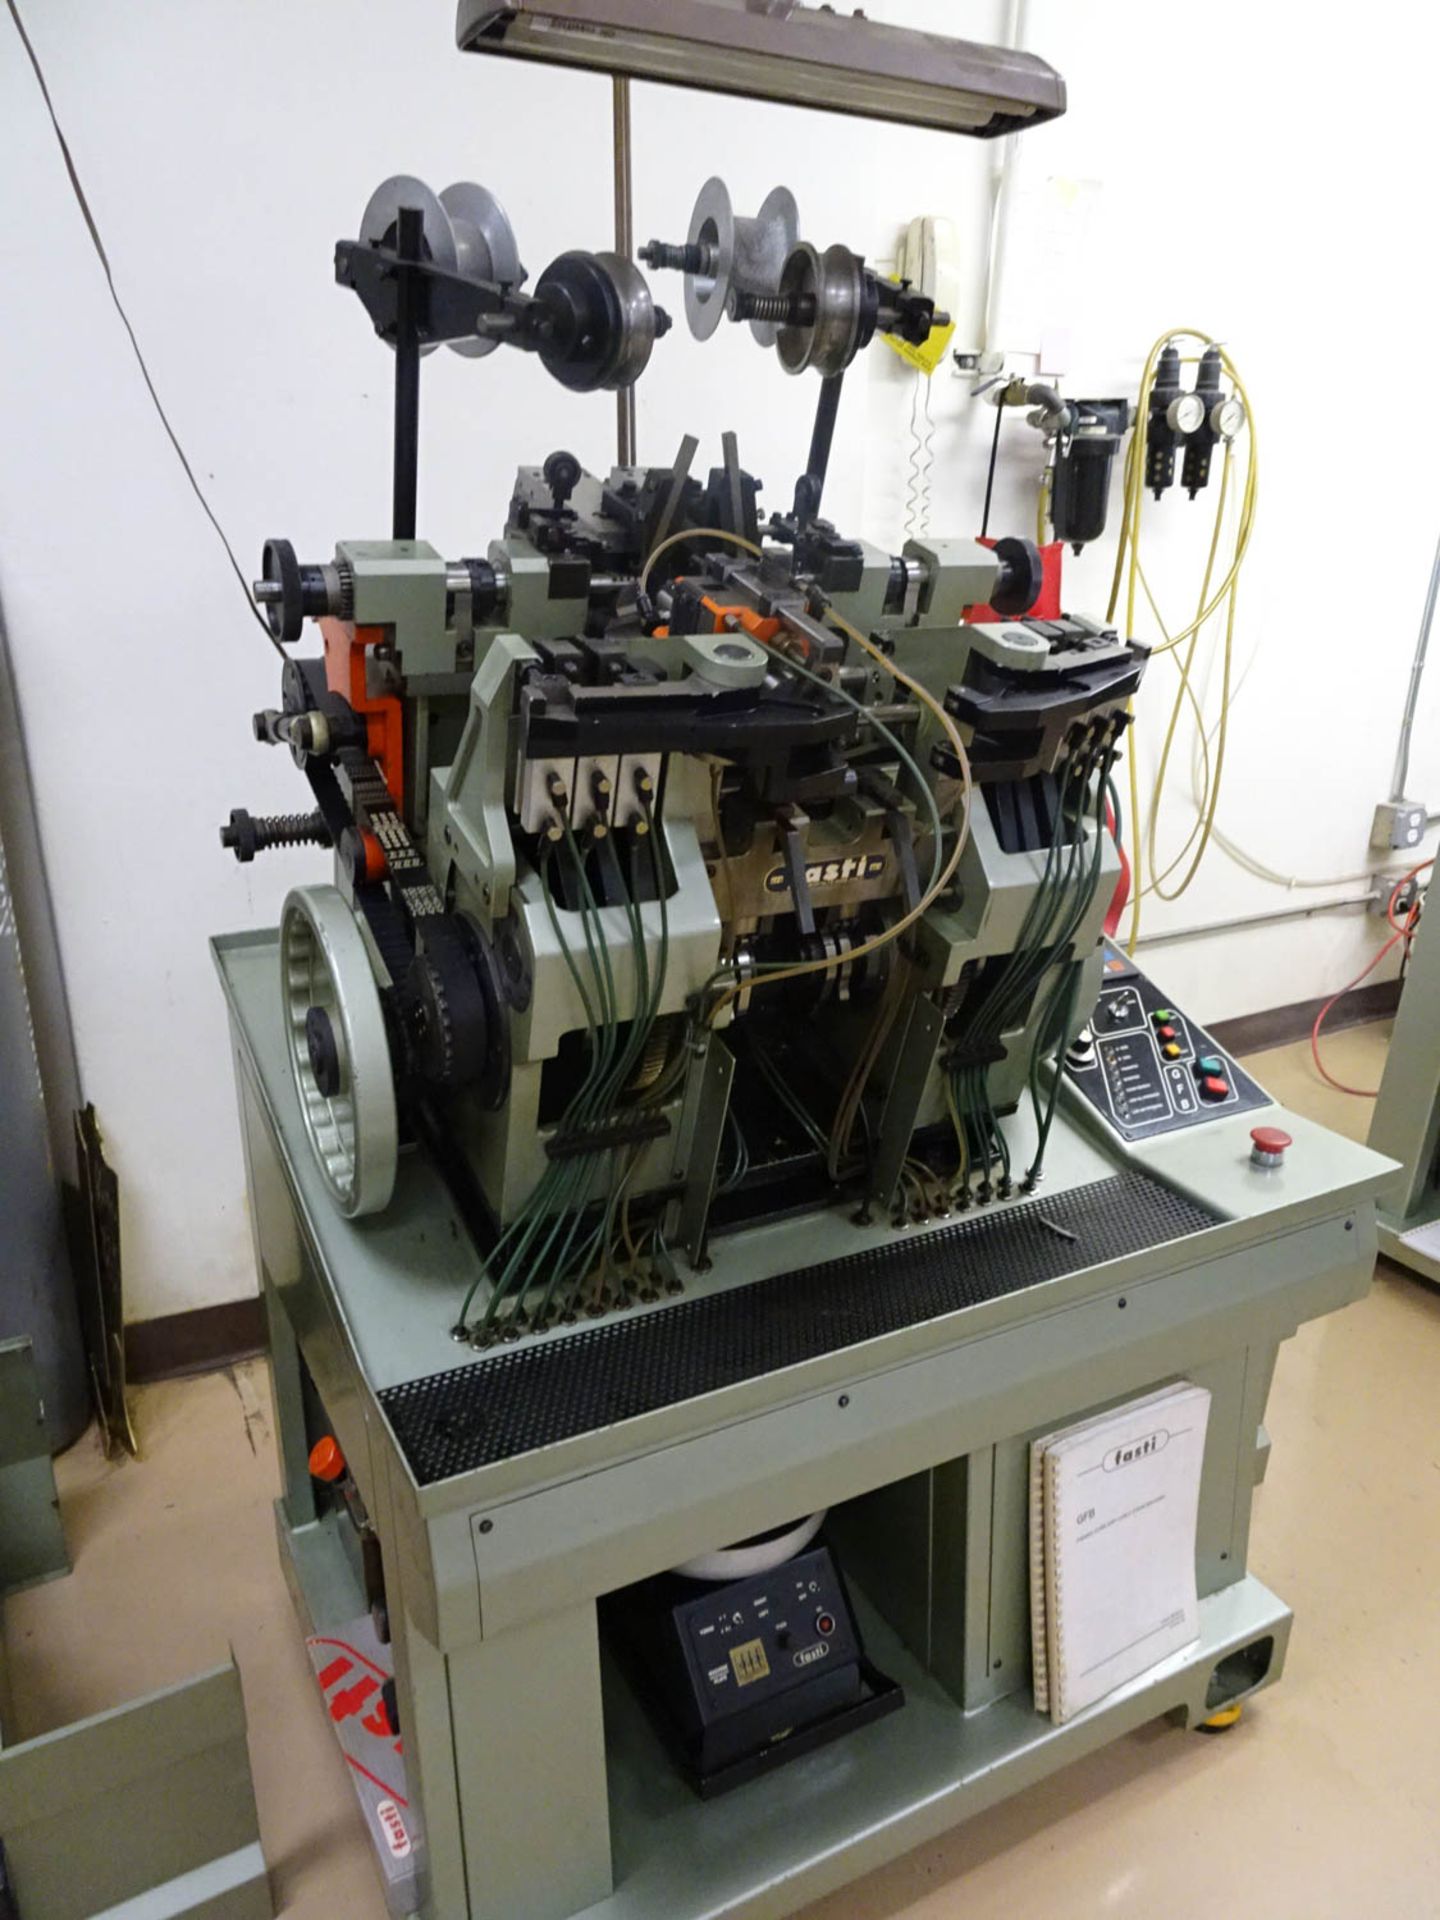 FASTI MDL. GFB (ITALY) (CE) FIGARO (LONG & SHORT LINKS) CHAIN MAKING MACHINE, ELECTRONIC, BIG - Image 2 of 8